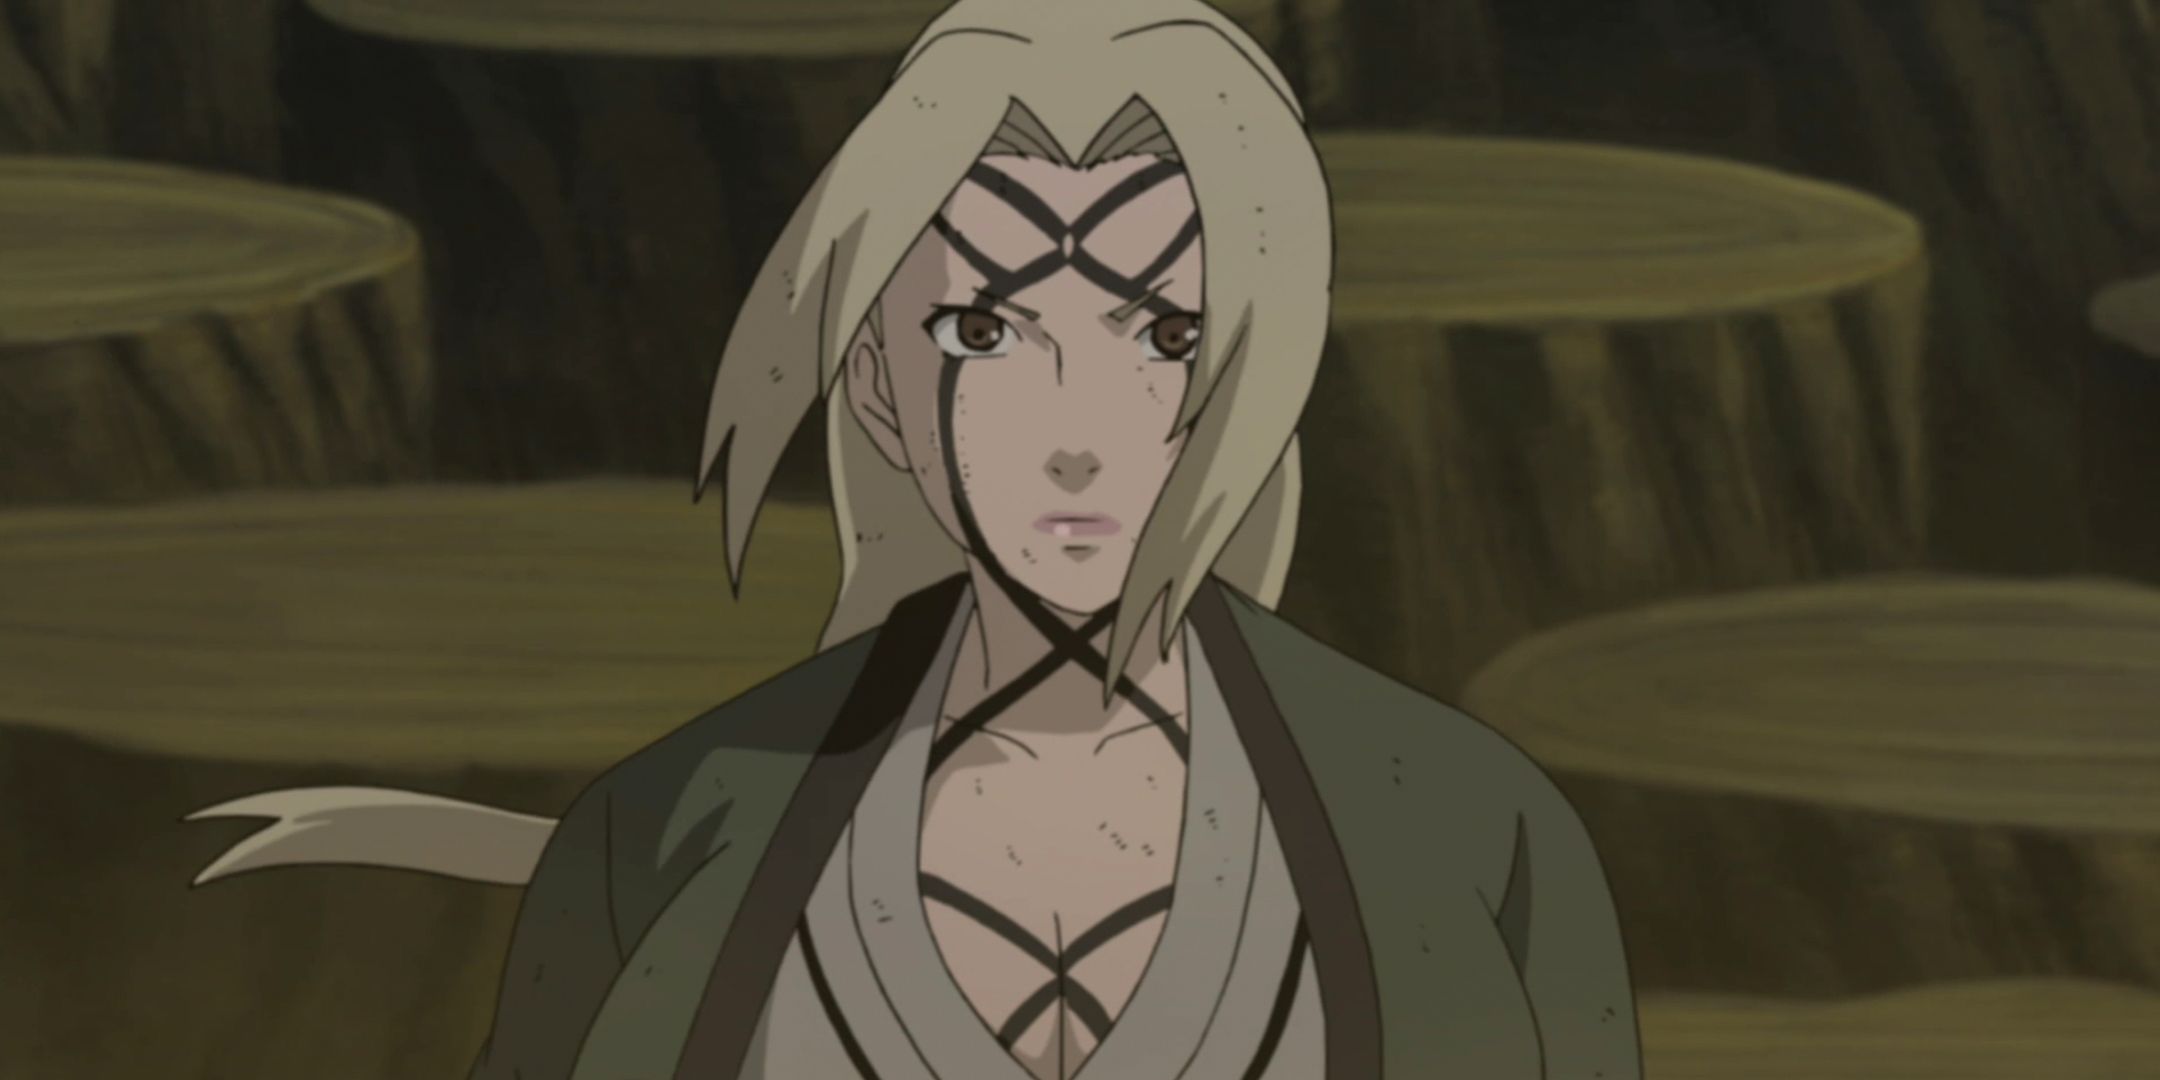 Tsunade releases the seal on her body to activate her chakra lines in Naruto Shippuden